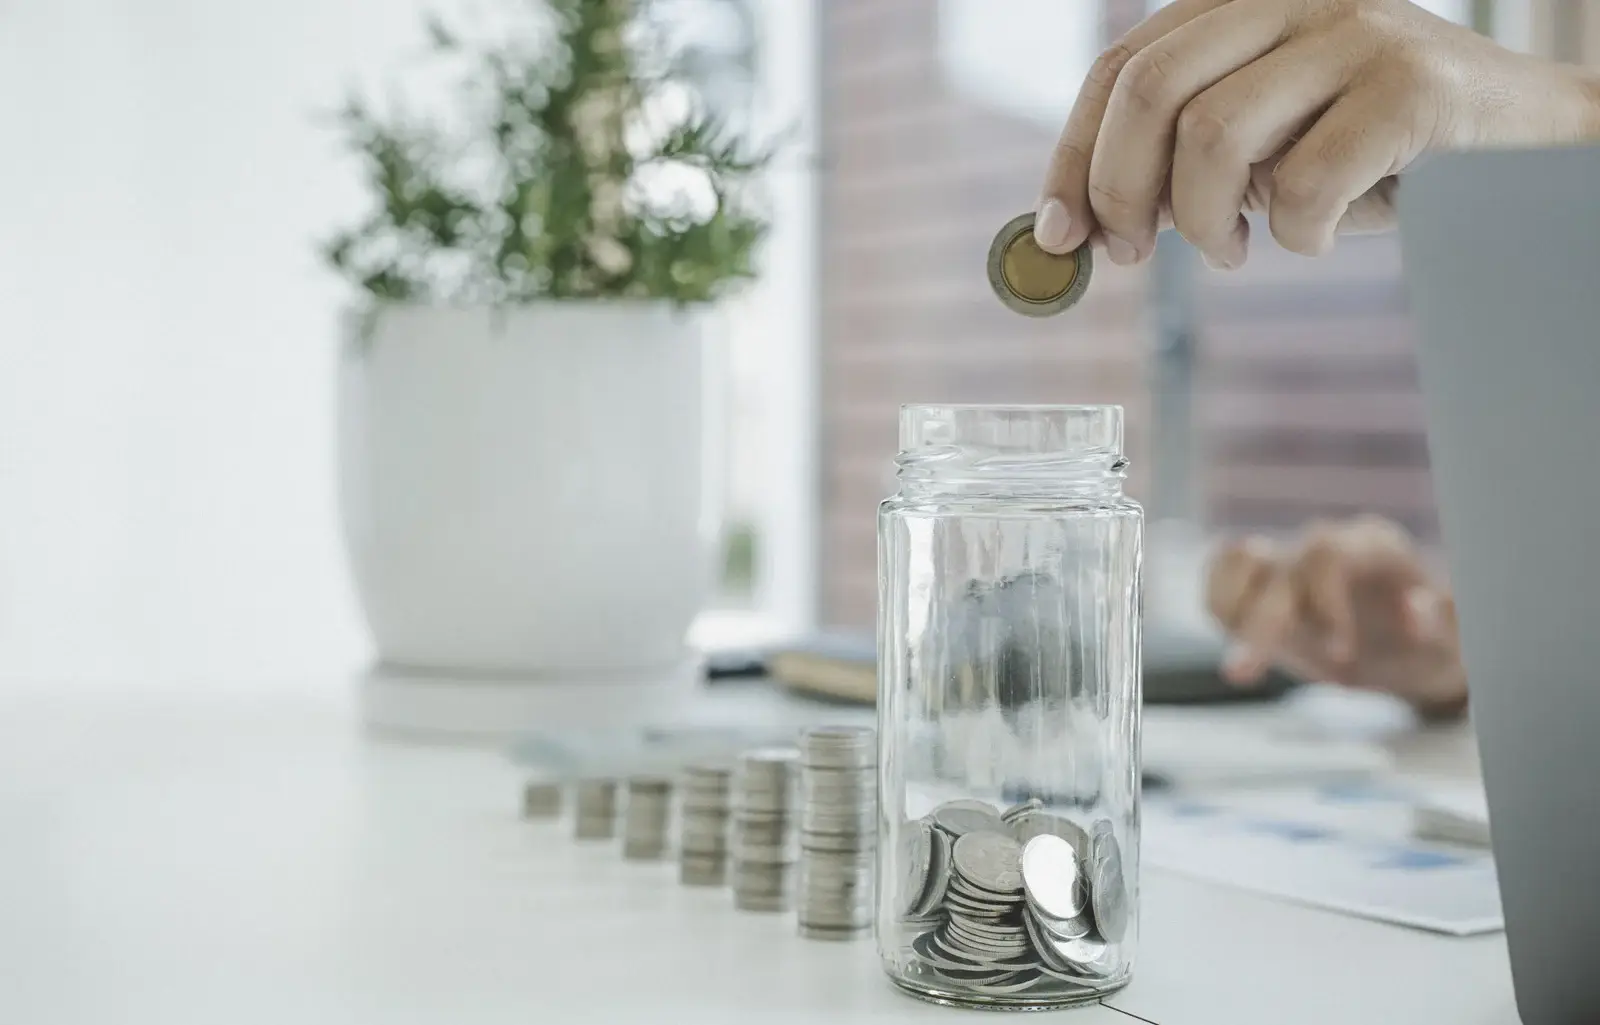 a person holding puting a coin in a glass - financial benefits